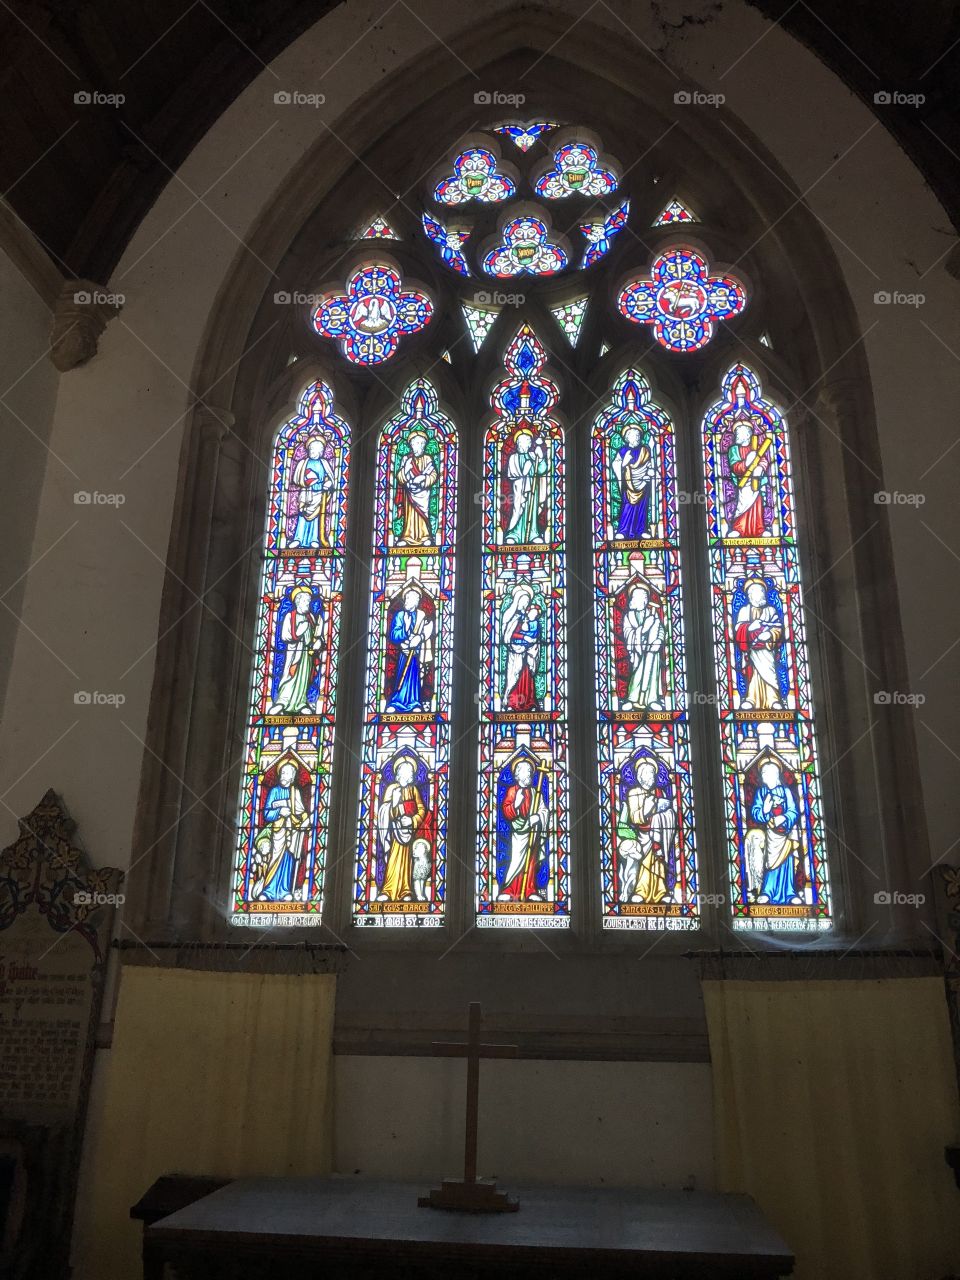 One of a number of beautiful stained glass windows to be found at St Mary’s Church at Bicton, Devon.